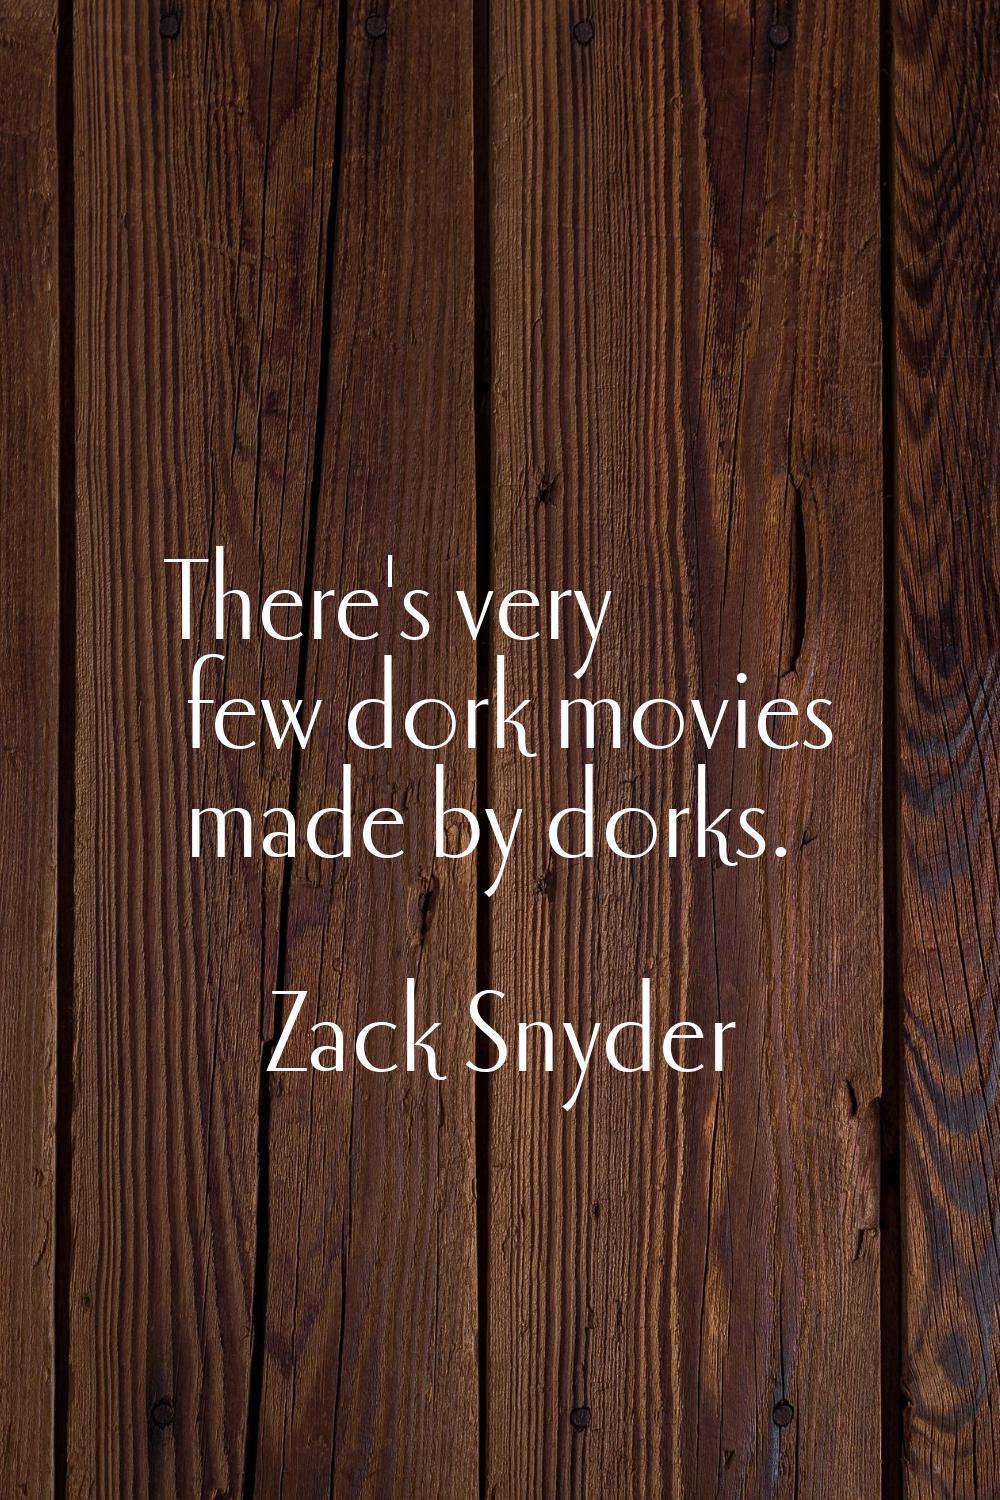 There's very few dork movies made by dorks.